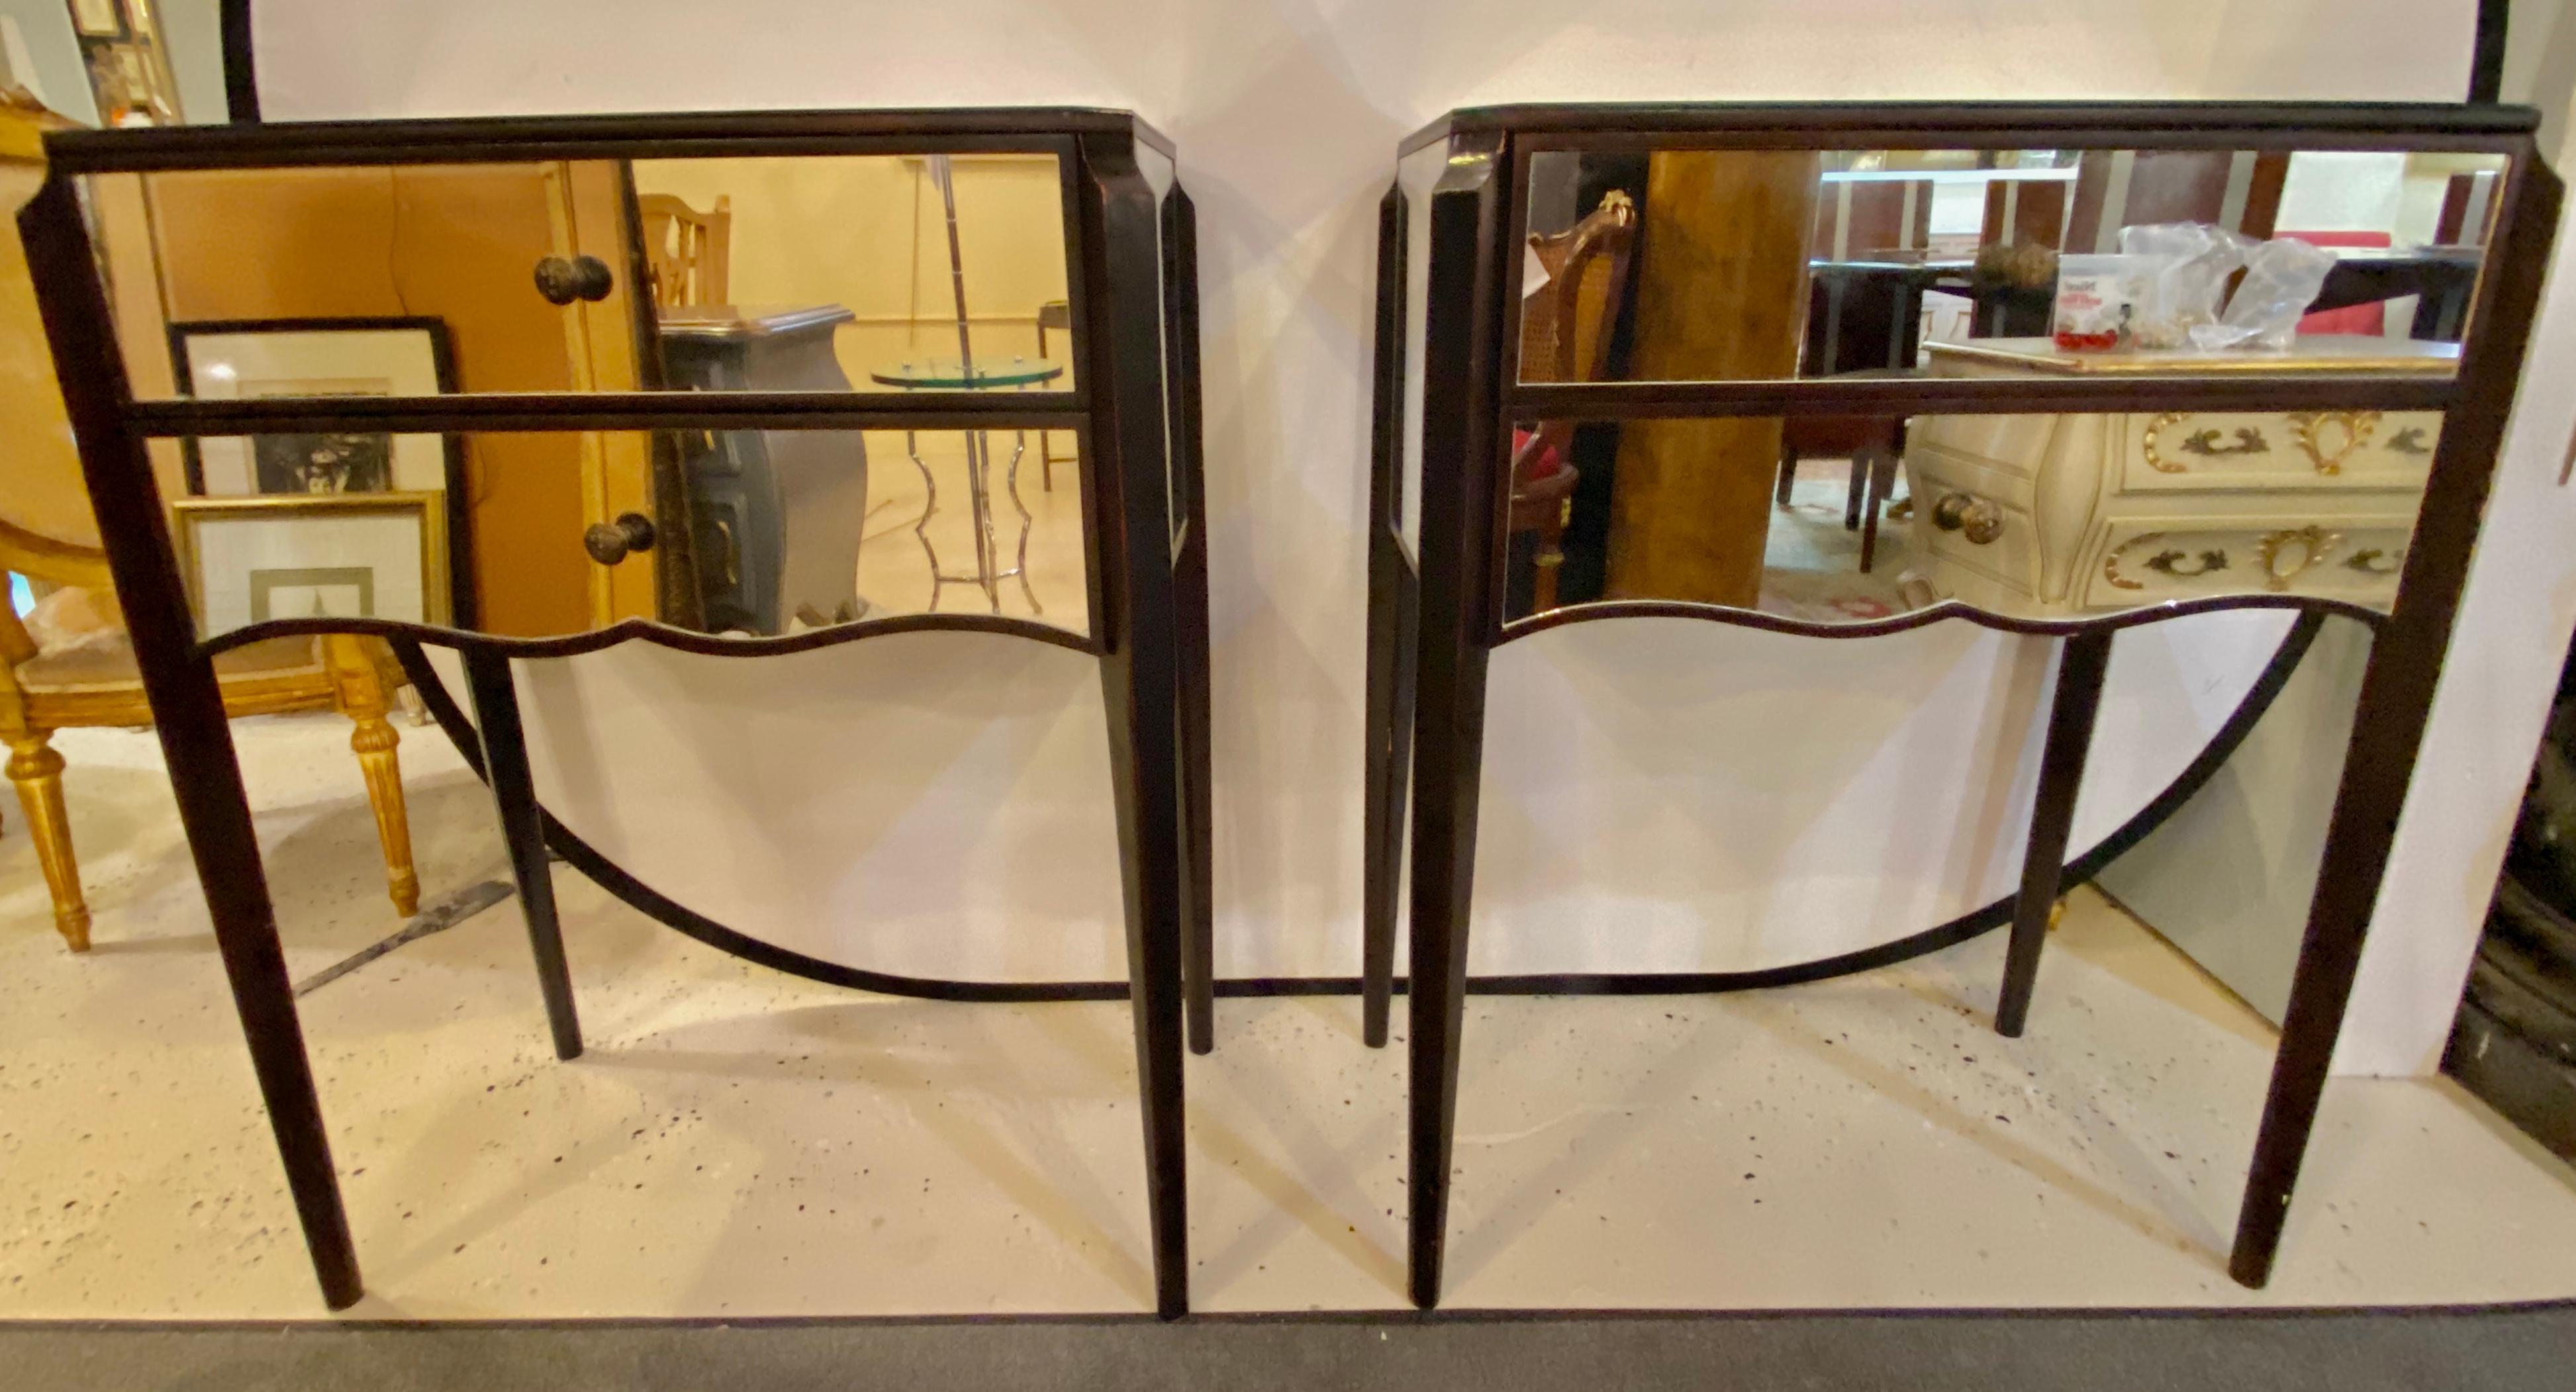 Pair of contemporary two-drawer mirrored nightstands or end tables in a very dark brown almost blackish finishes with all mirrored surrounds.